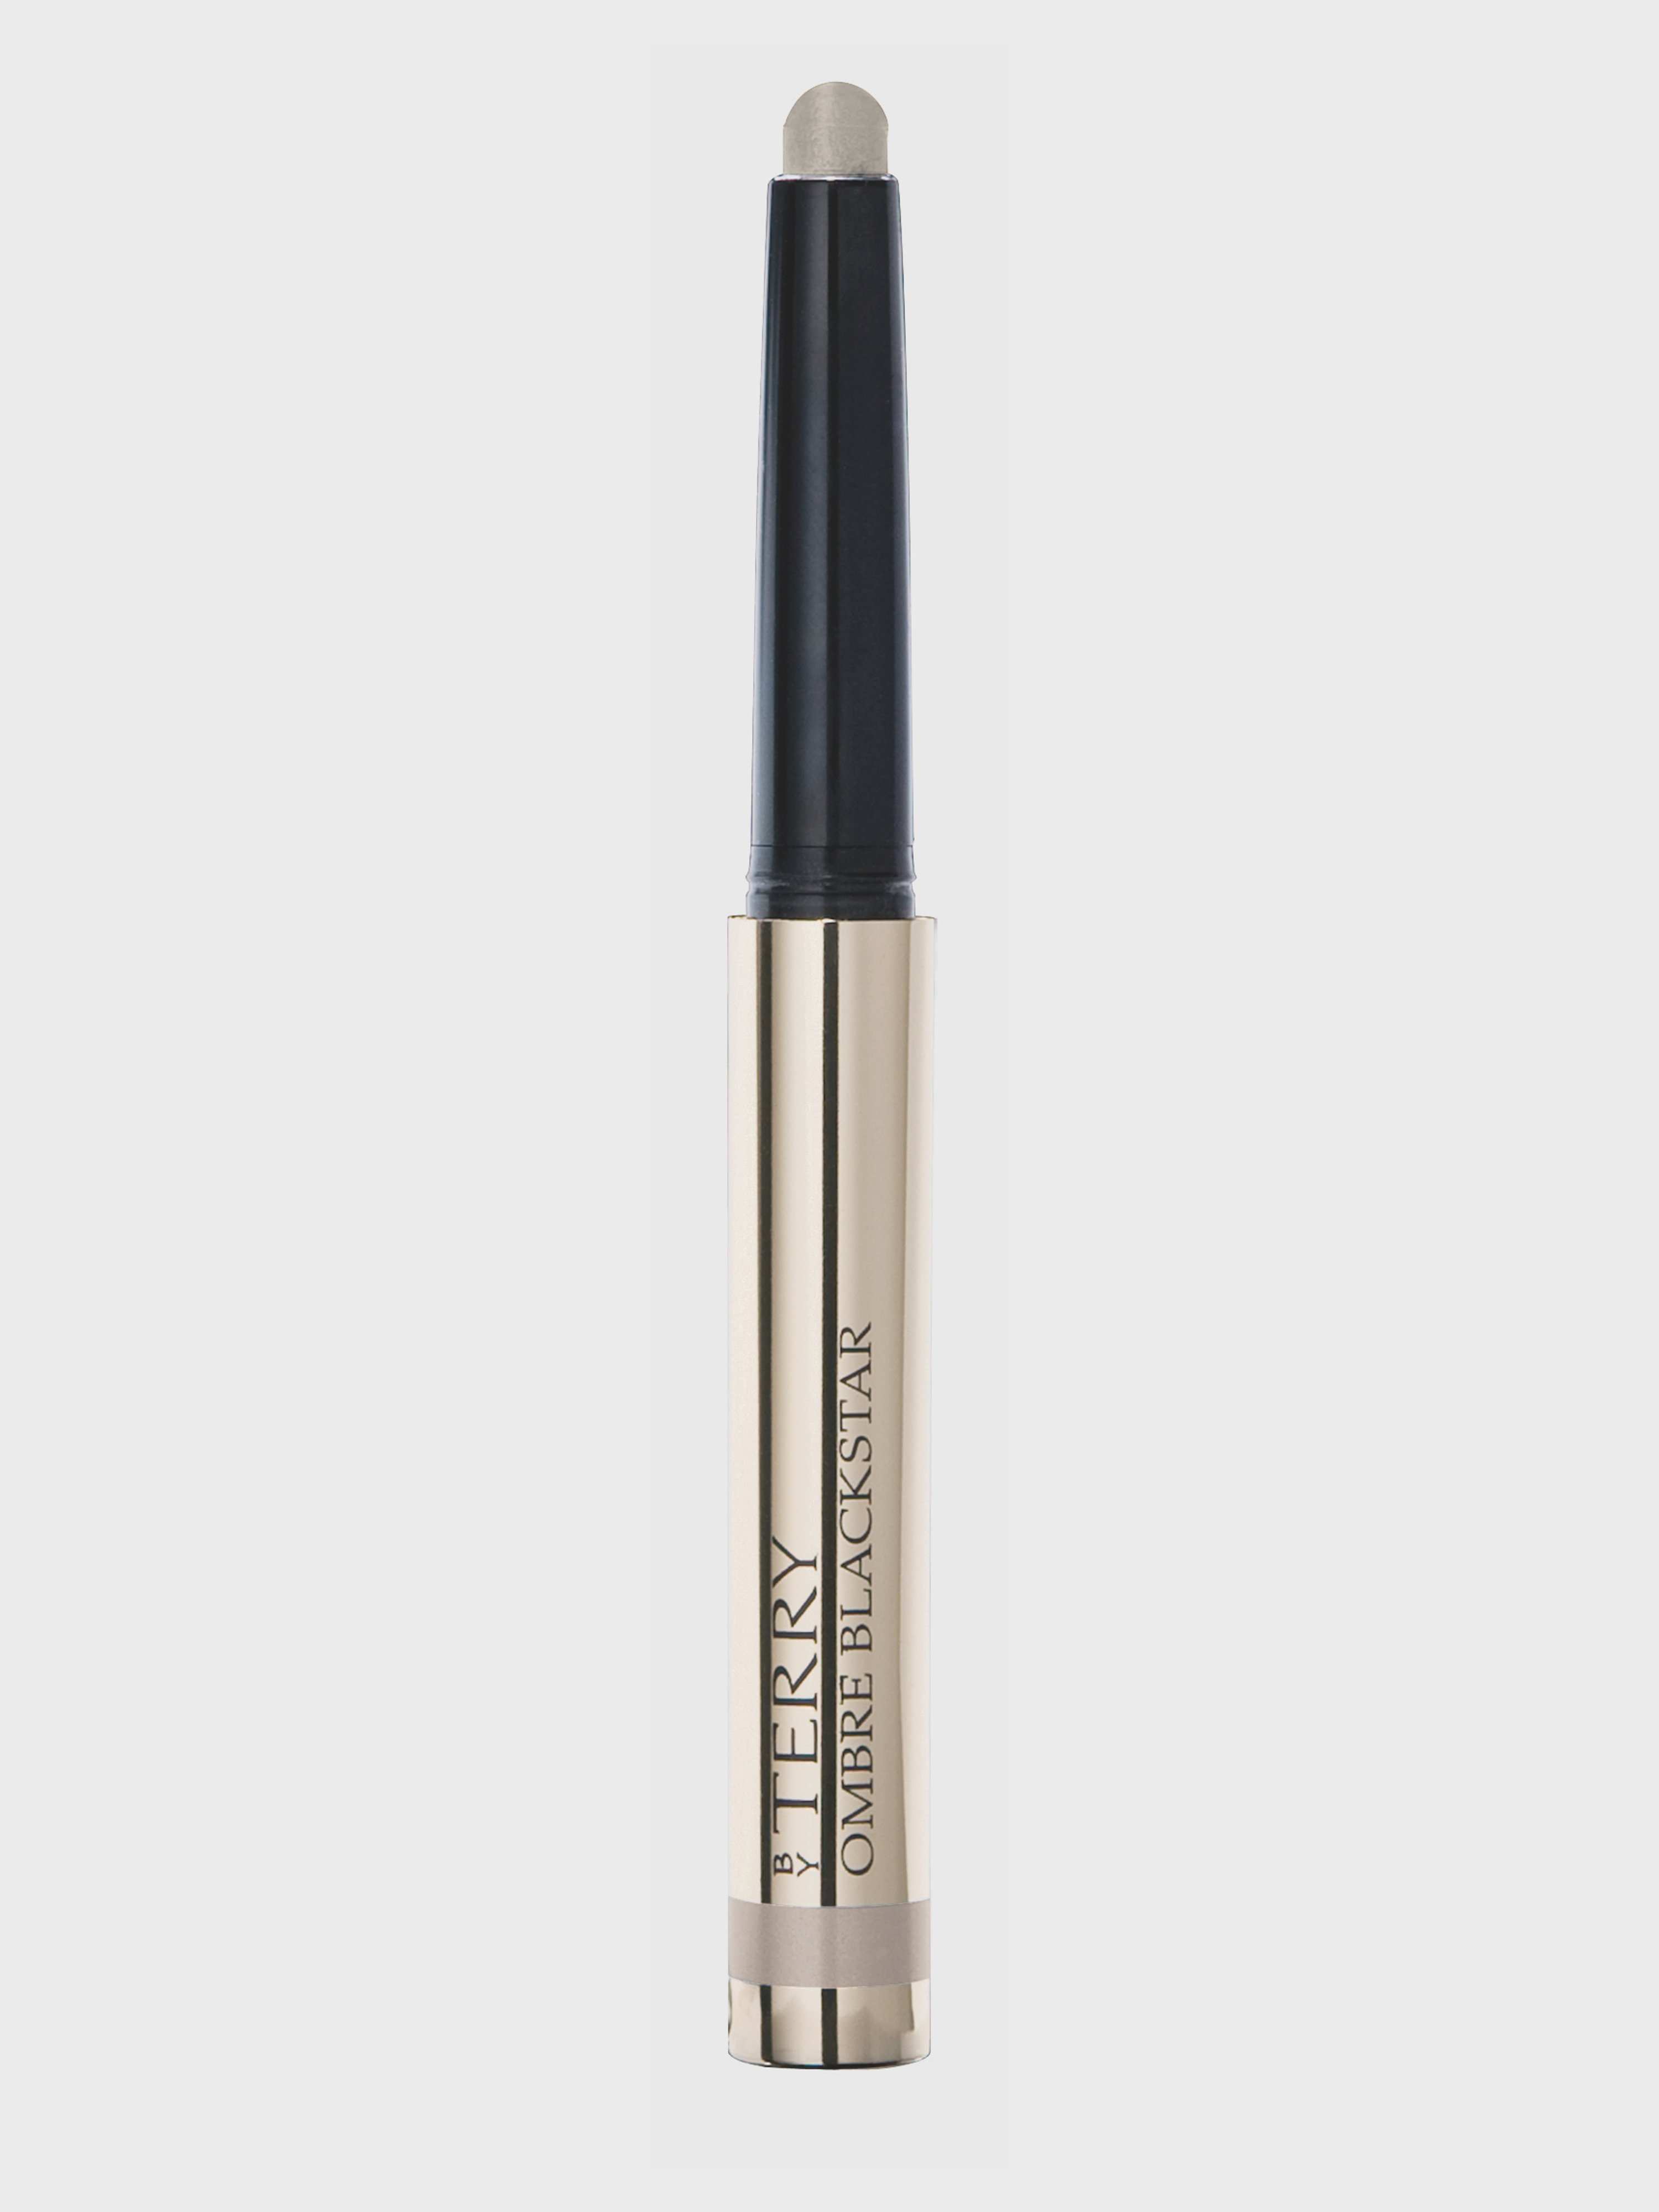 BY TERRY BY TERRY OMBRE BLACKSTAR COLOR-FIX CREAM EYESHADOW